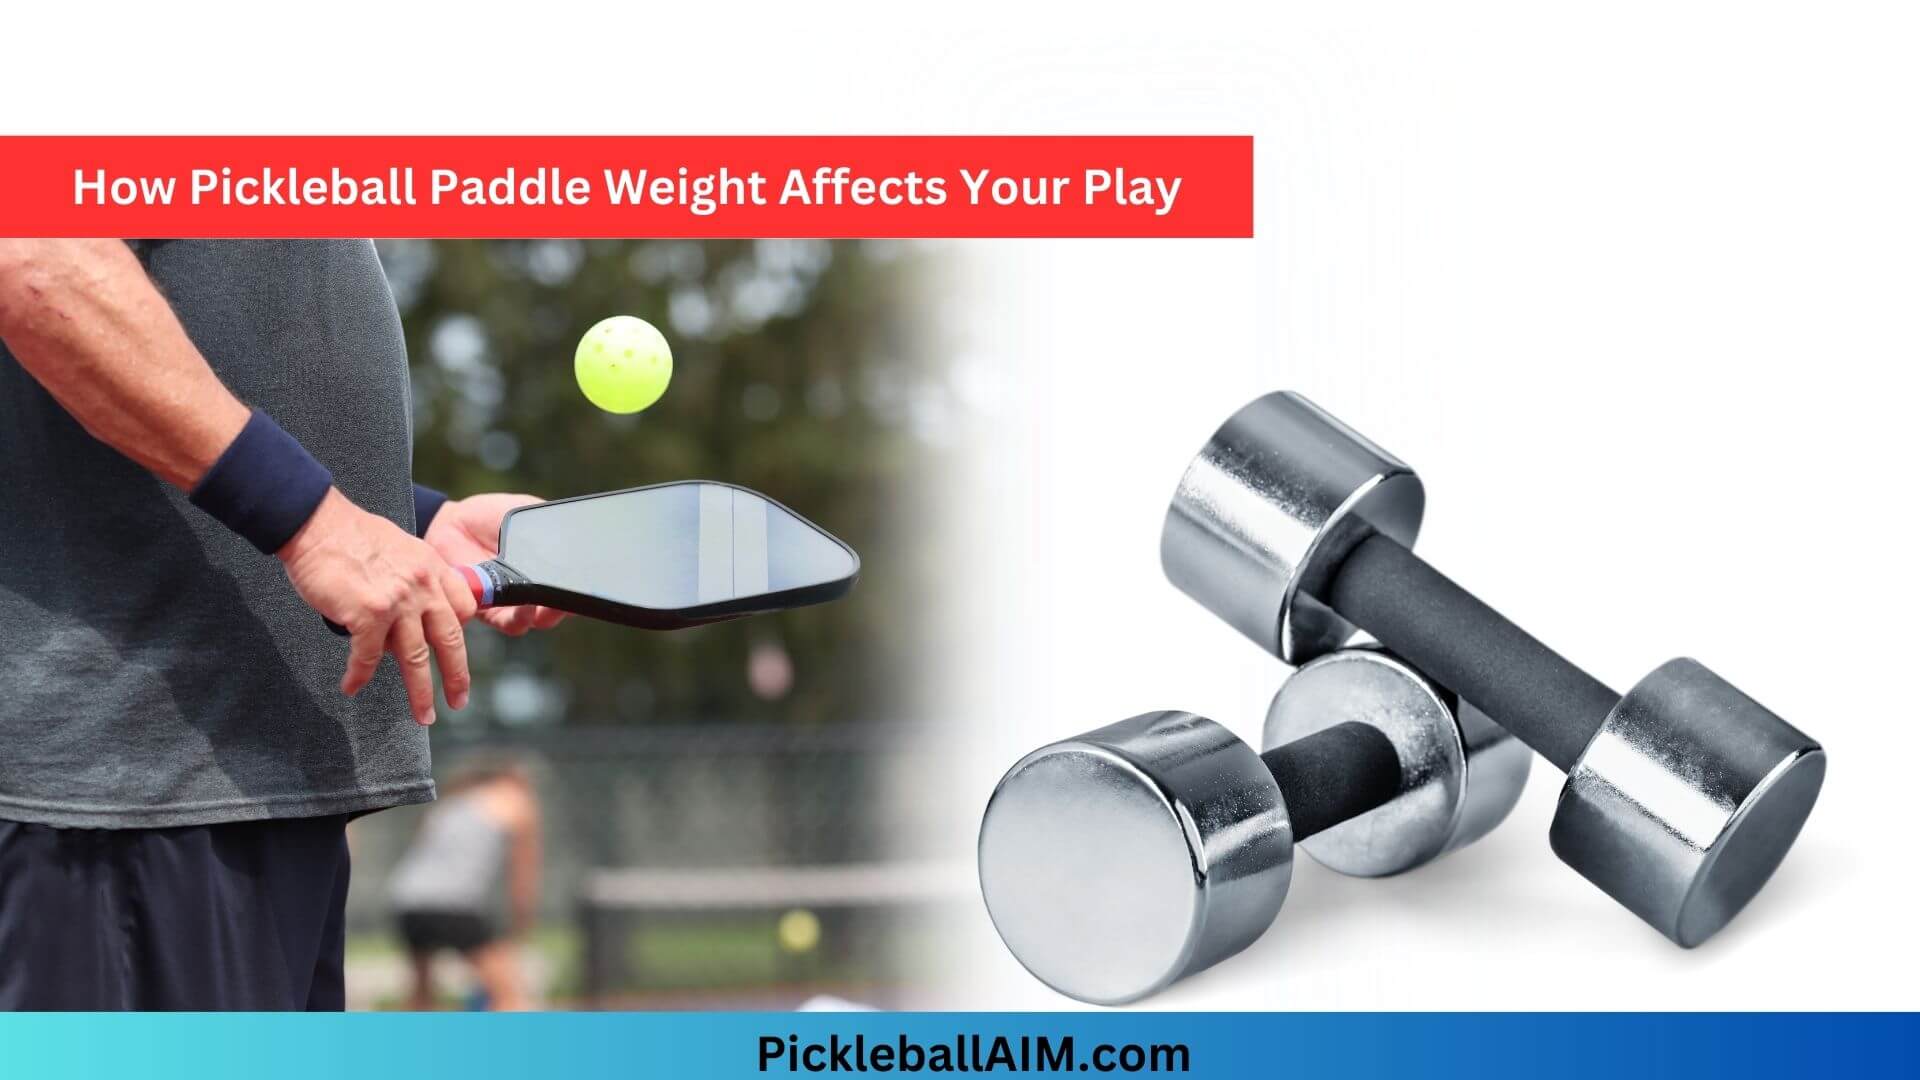 Finding Your Sweet Spot How Pickleball Paddle Weight Affects Your Play